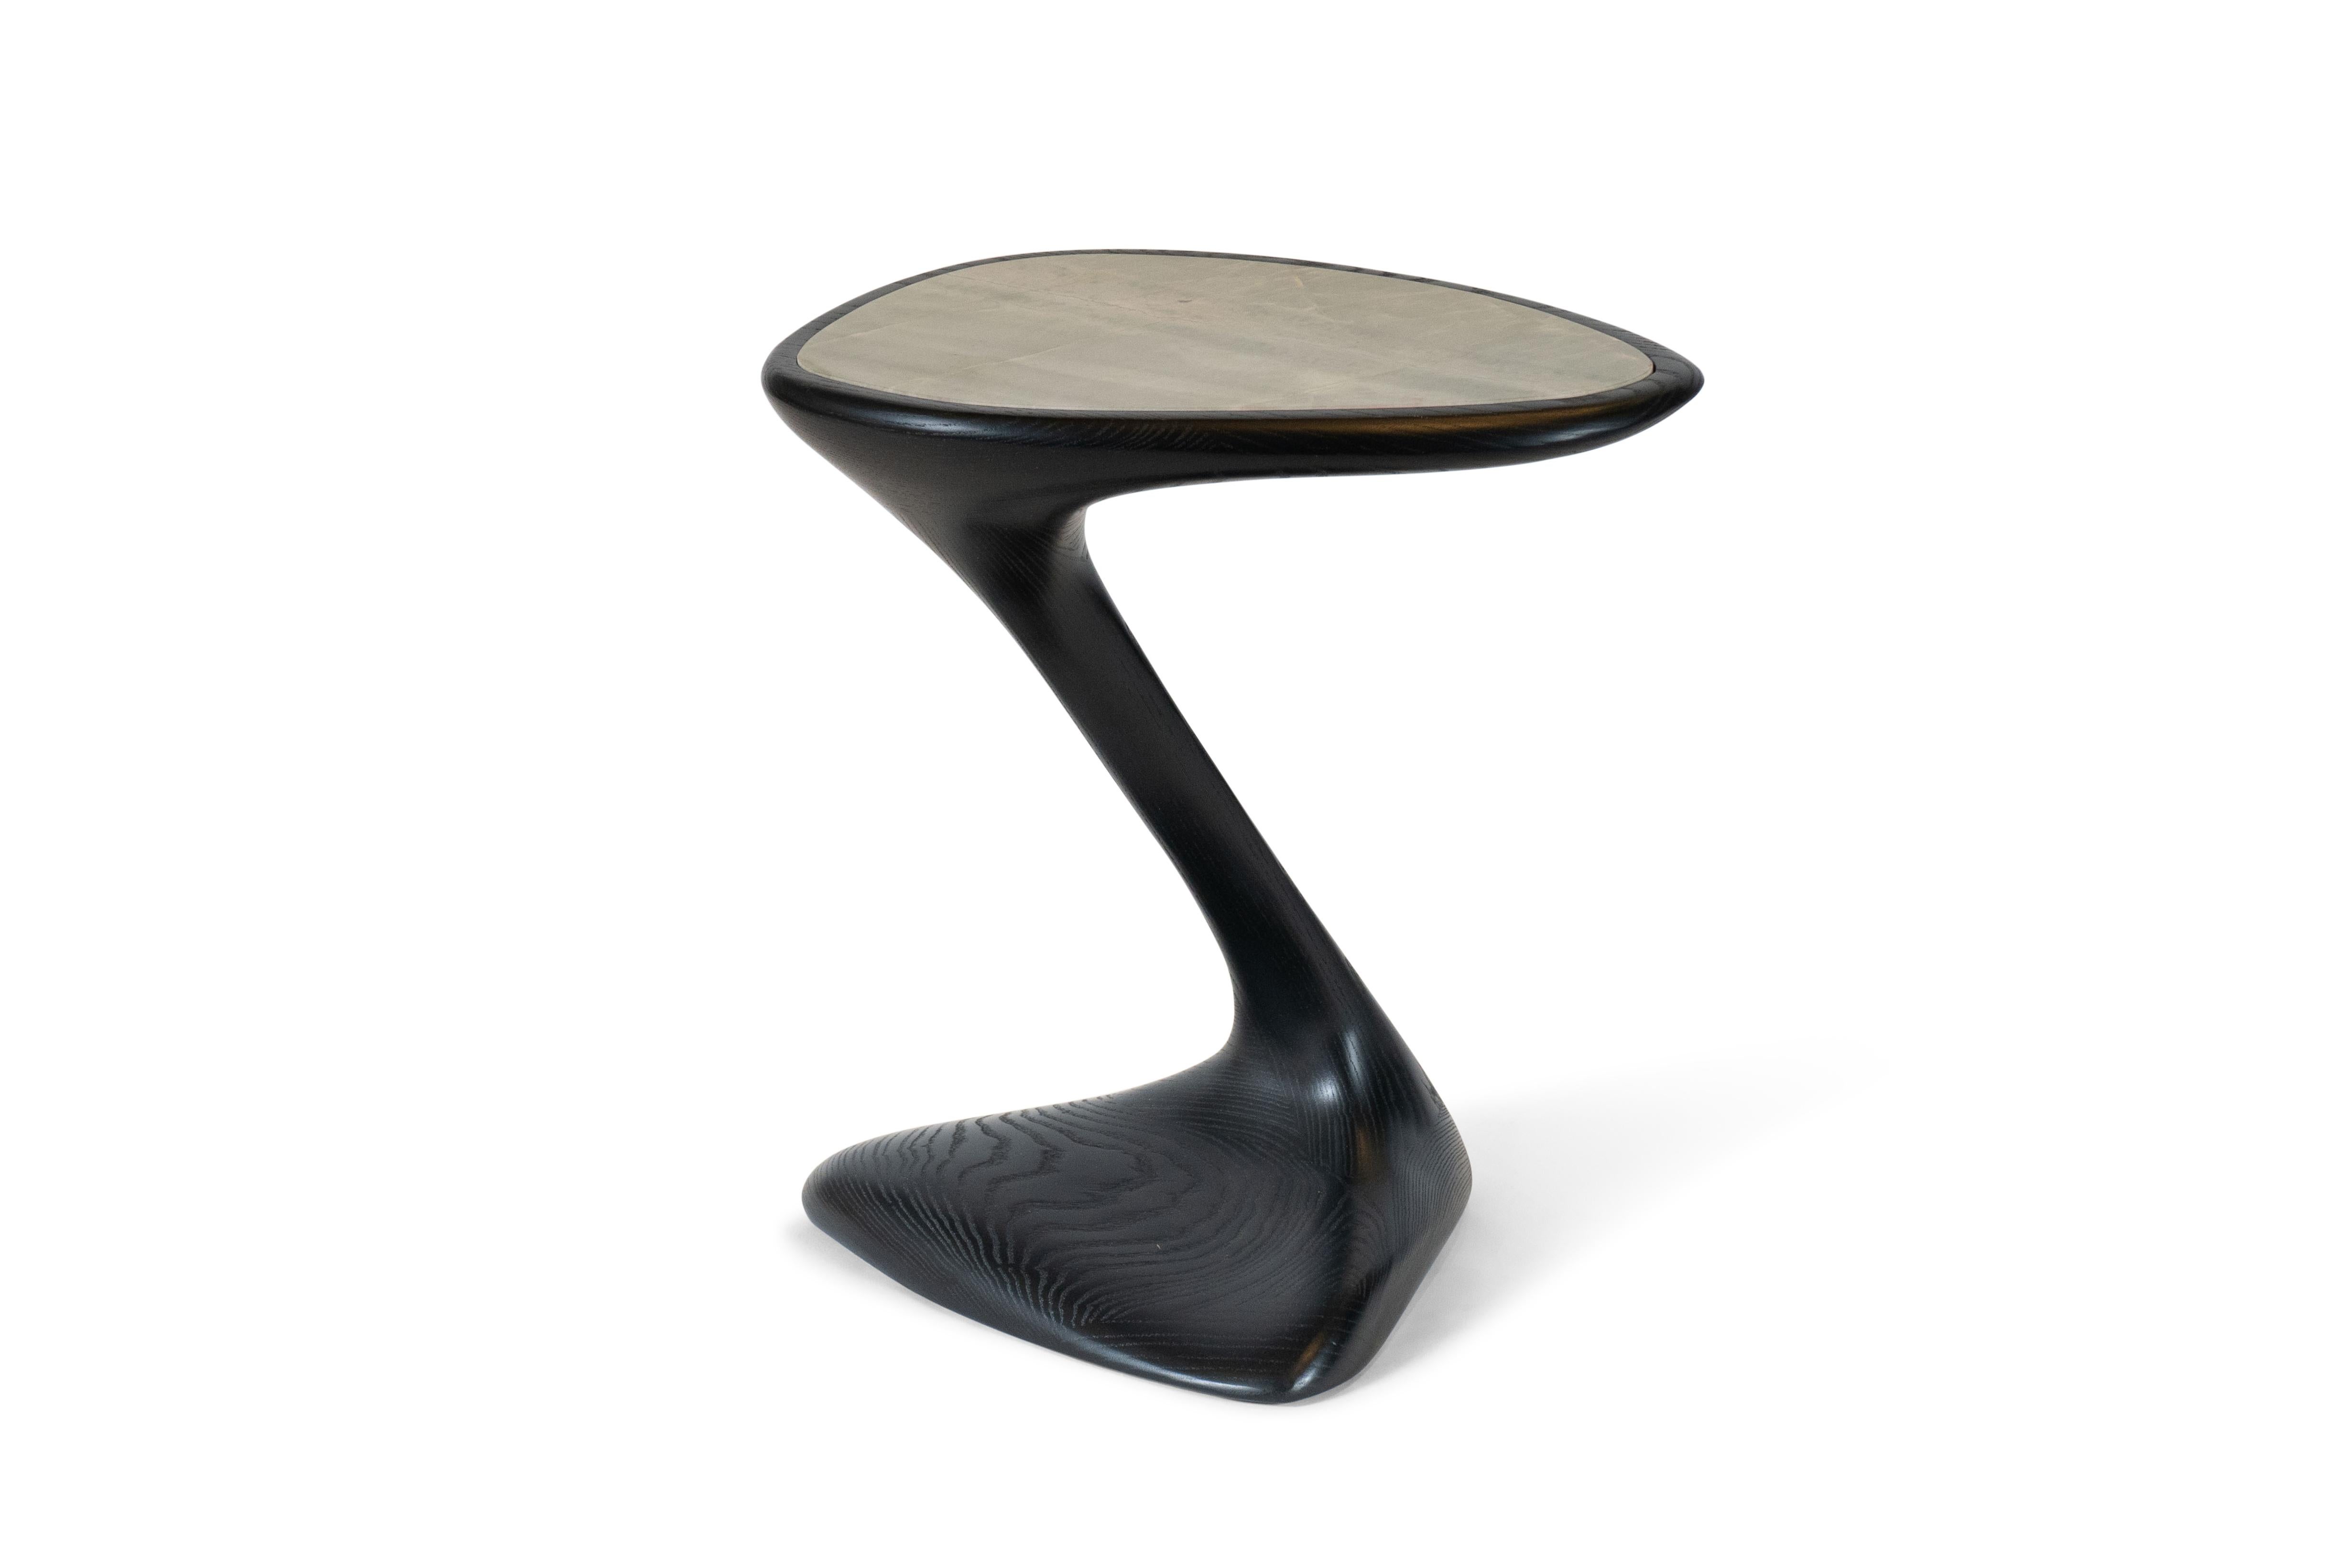 The palm side table is made out of wood with bronze finish with black marble top.

About Amorph: 
Amorph is a design and manufacturing company based in Los Angeles, California. We take pride in hand crafted designs connected to technology to create